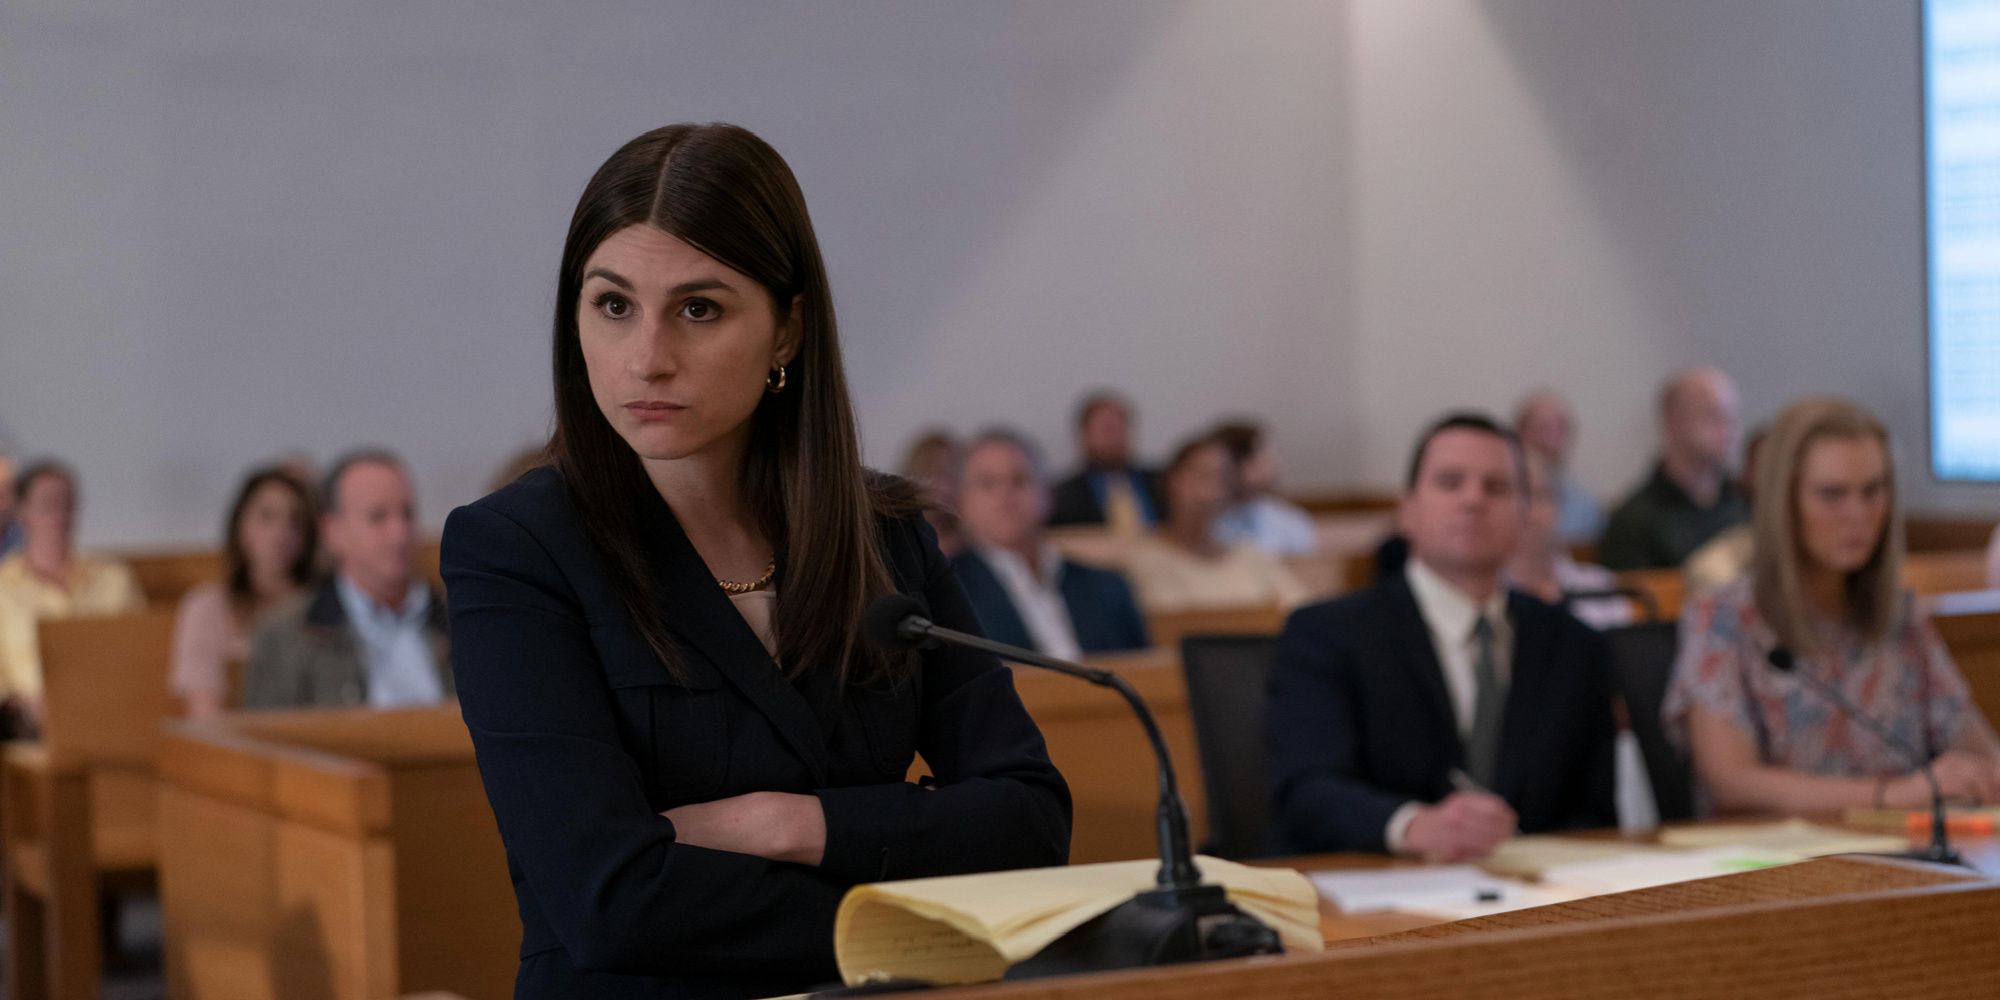 Katie Rayburn in court on The Girl From Plainville